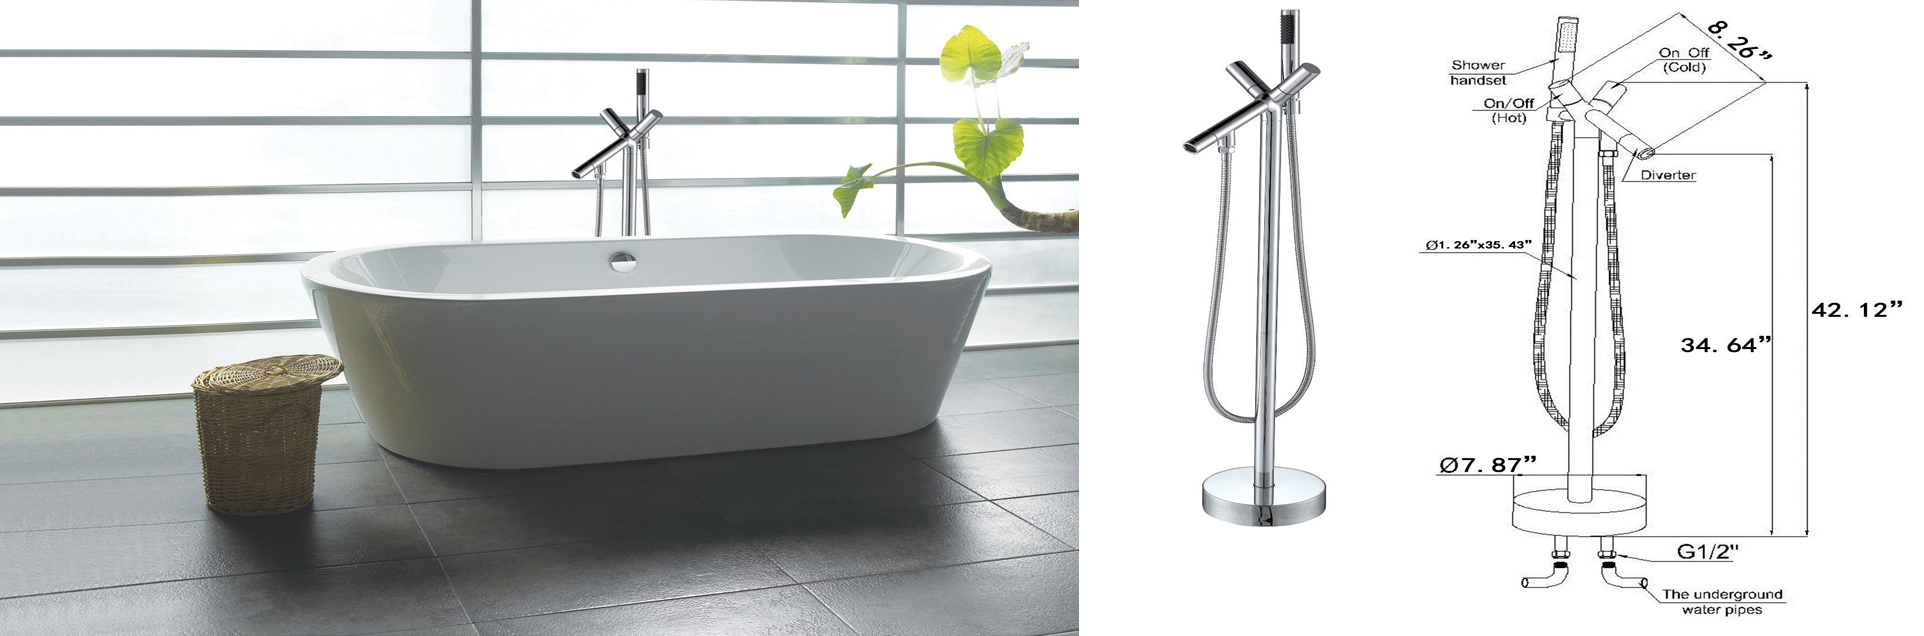 Princeton 71 Bathtub with Floor Mounted Faucet